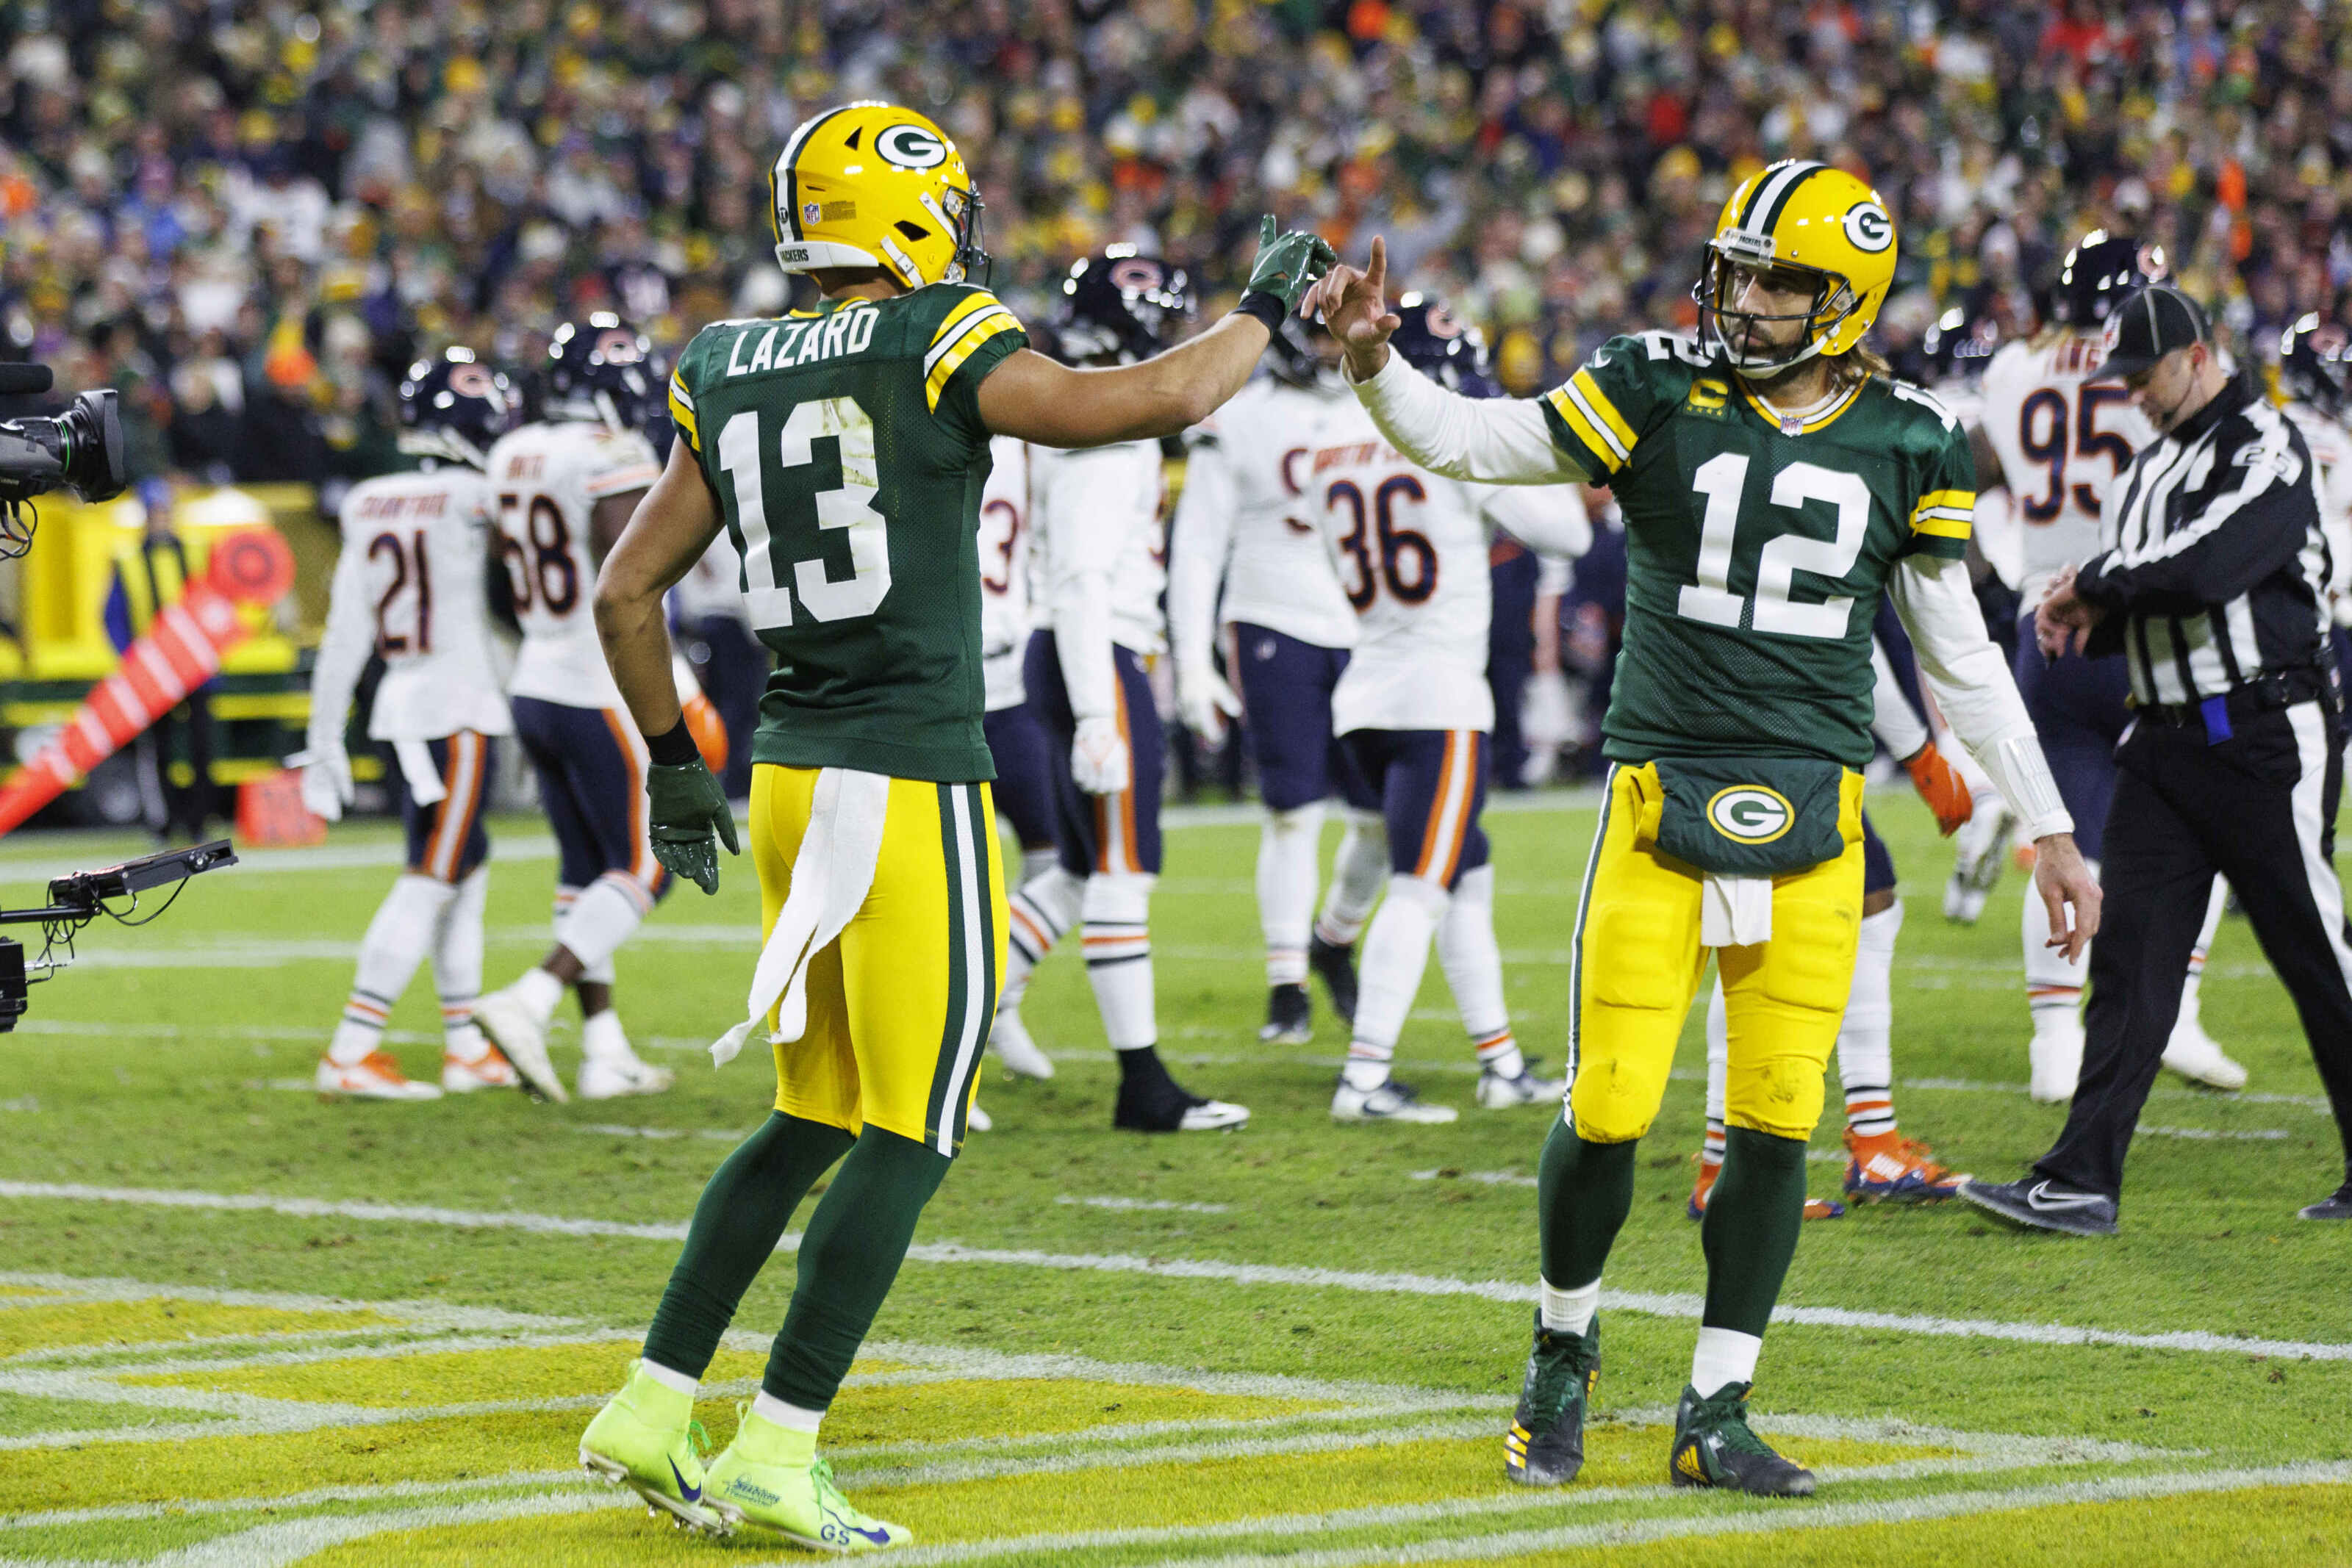 Final thoughts on Green Bay Packers vs. Bears Week 2 matchup